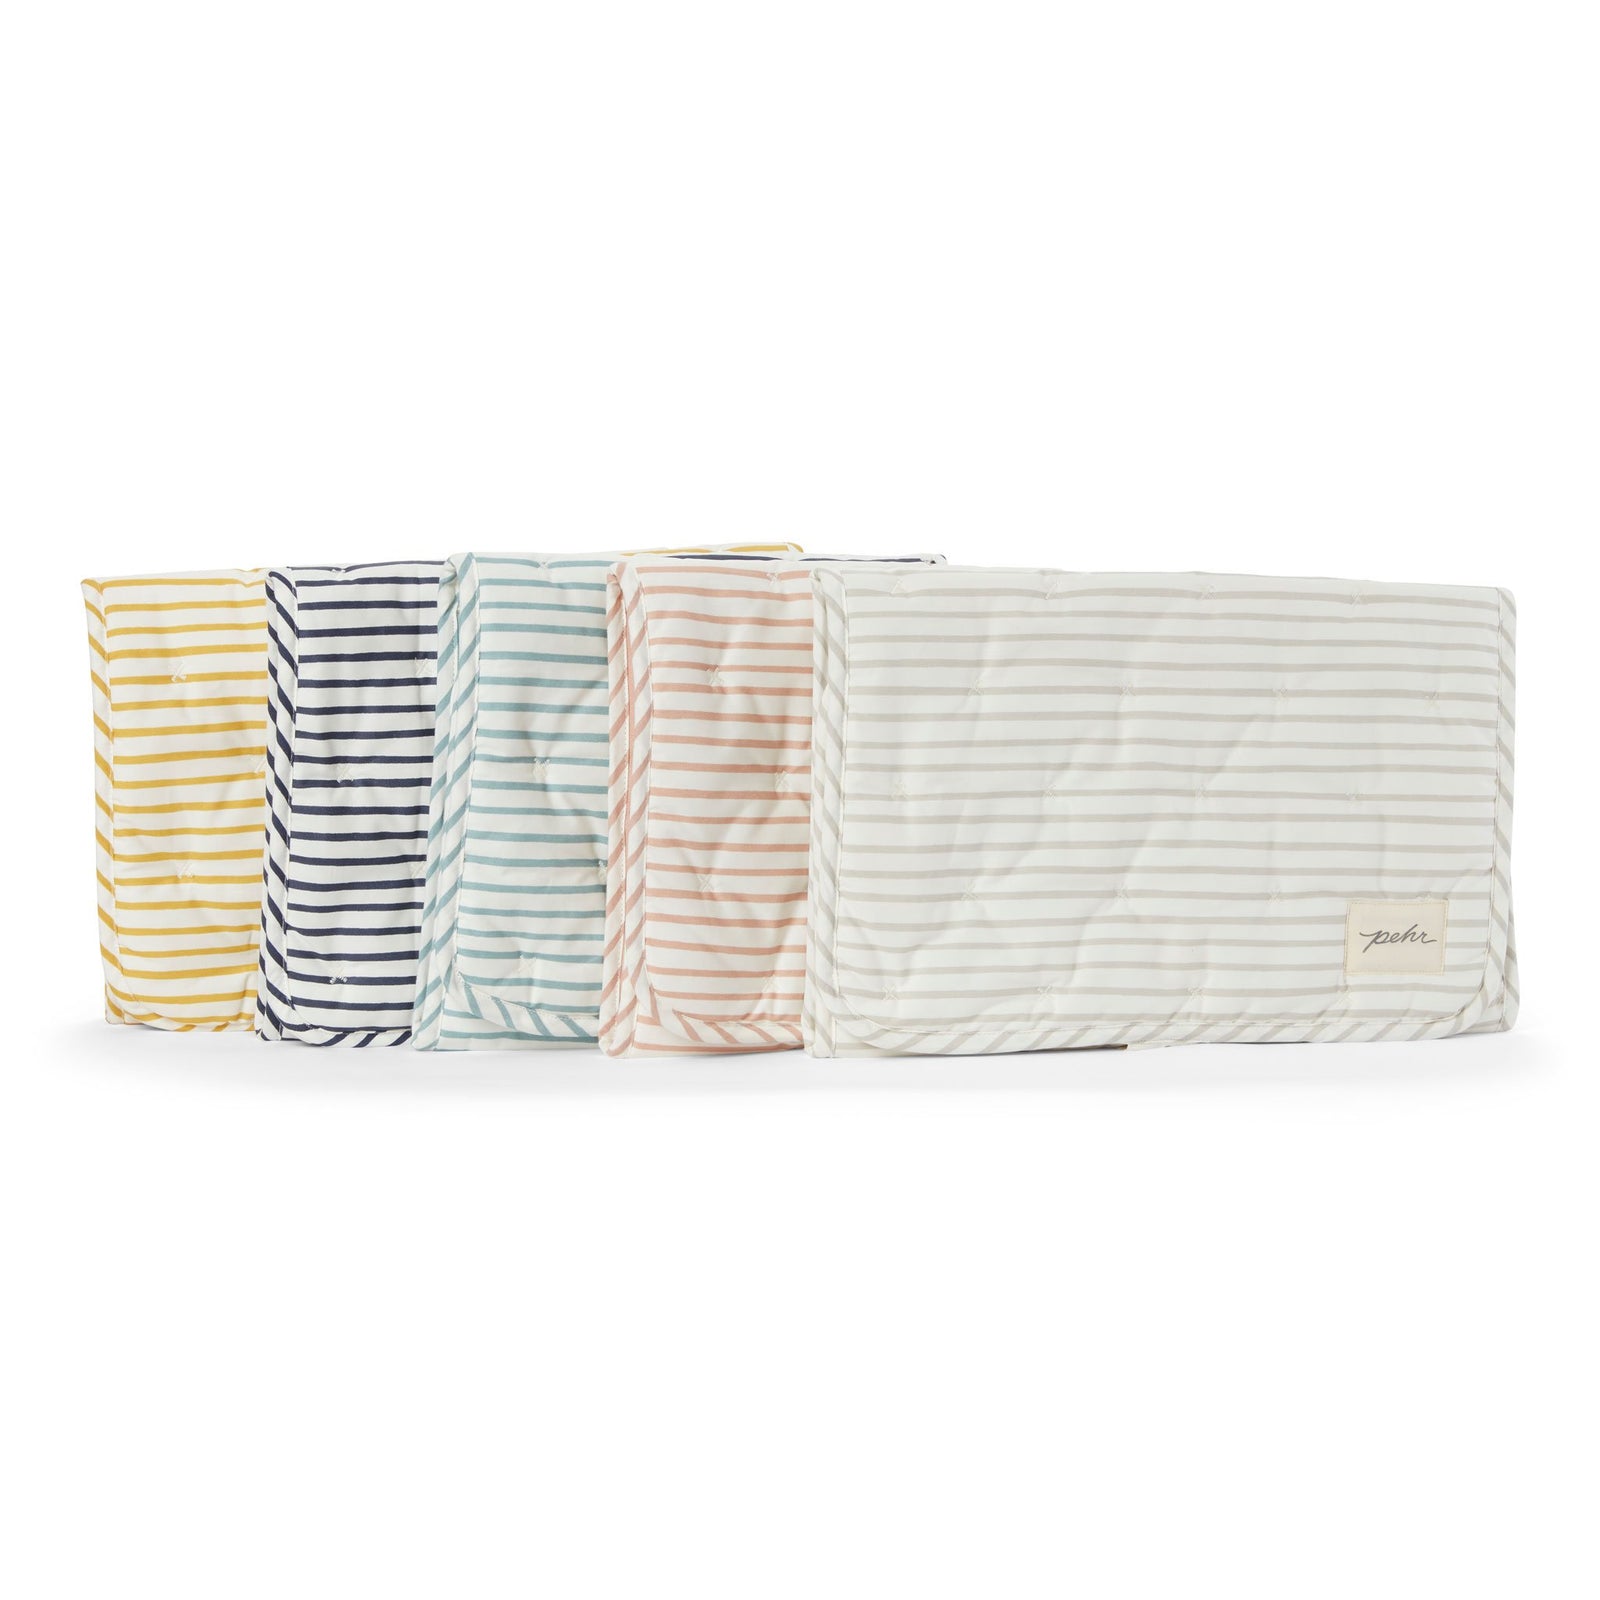 All of the Pehr Organic On The Go Travel Change Pads in Rose Pink, Deep Sea, Pebble, Marigold, and Ink Blue layered on top of each other. GOTS Certified Organic Cotton & Dyes.